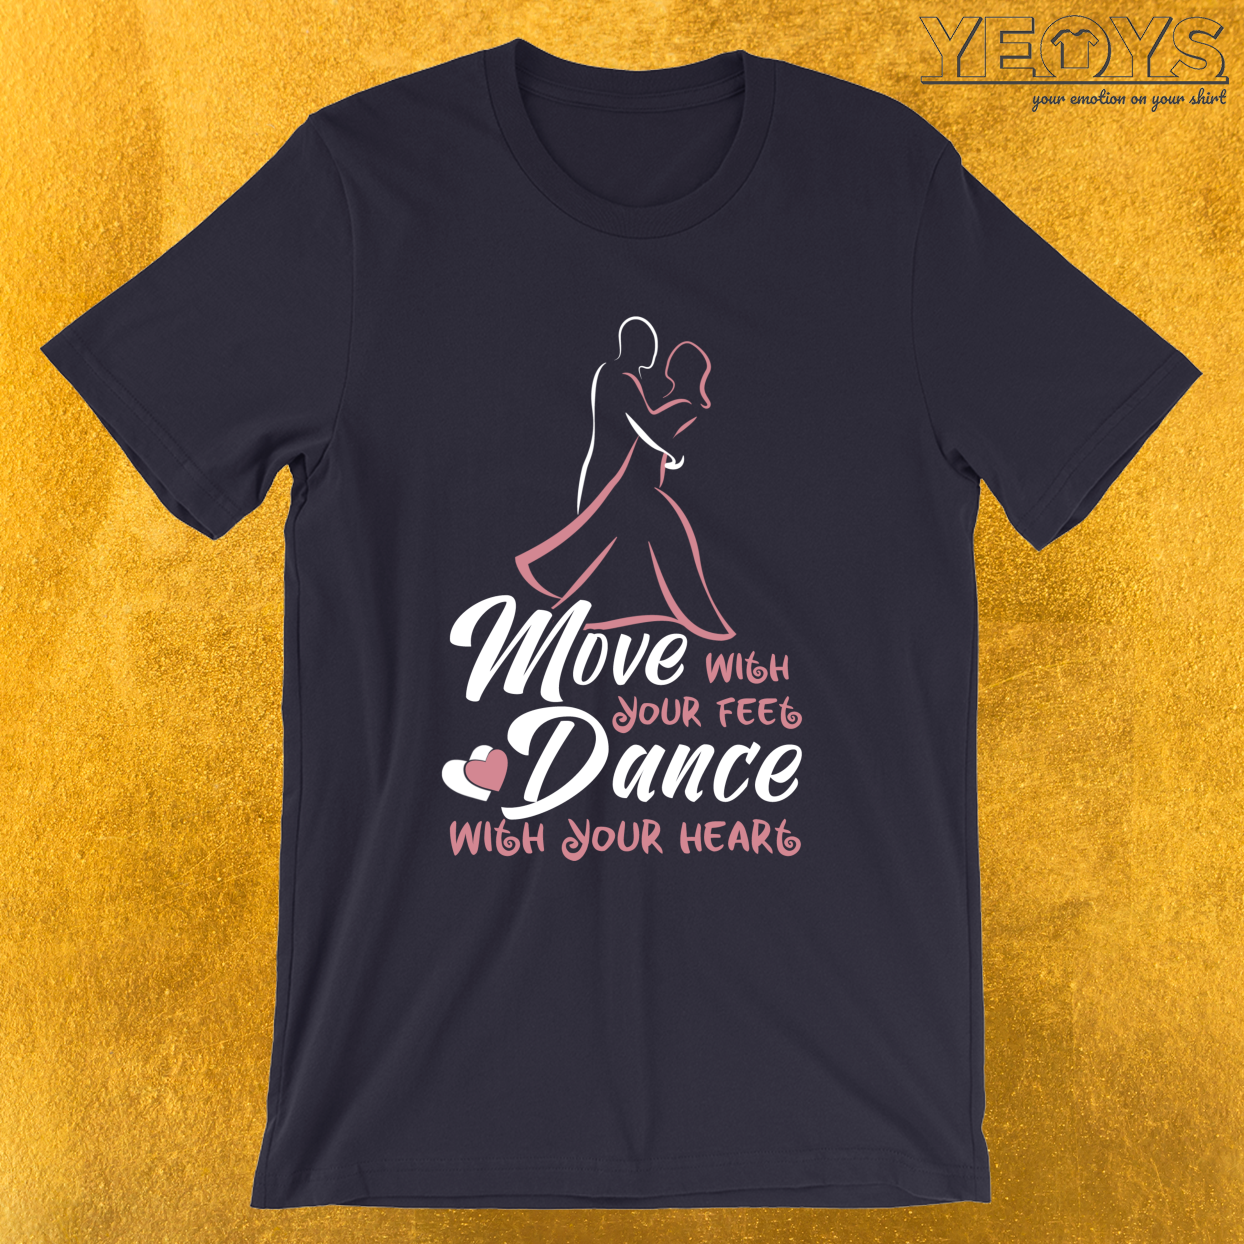 Move With Your Feet Dance With Your Heart – Ballroom Dance Tee